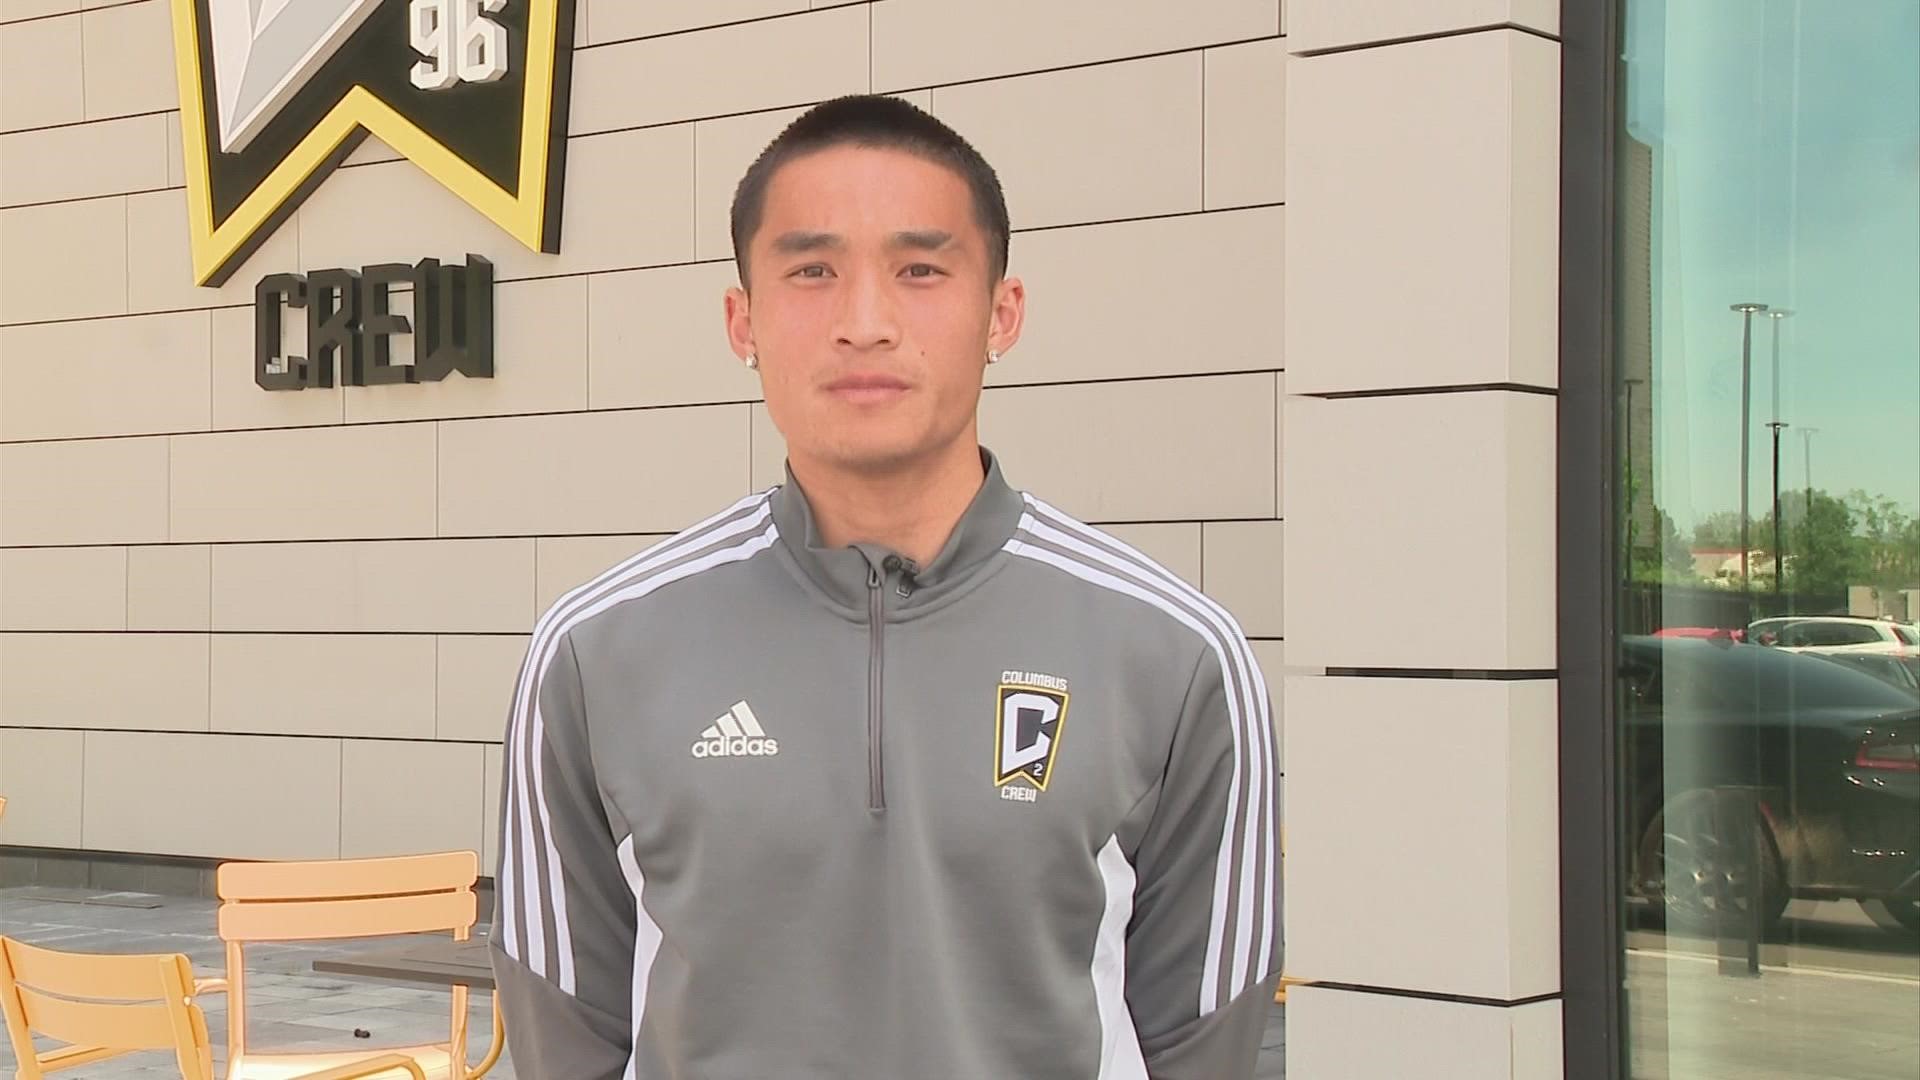 Michael Vang is a player for Columbus Crew 2.